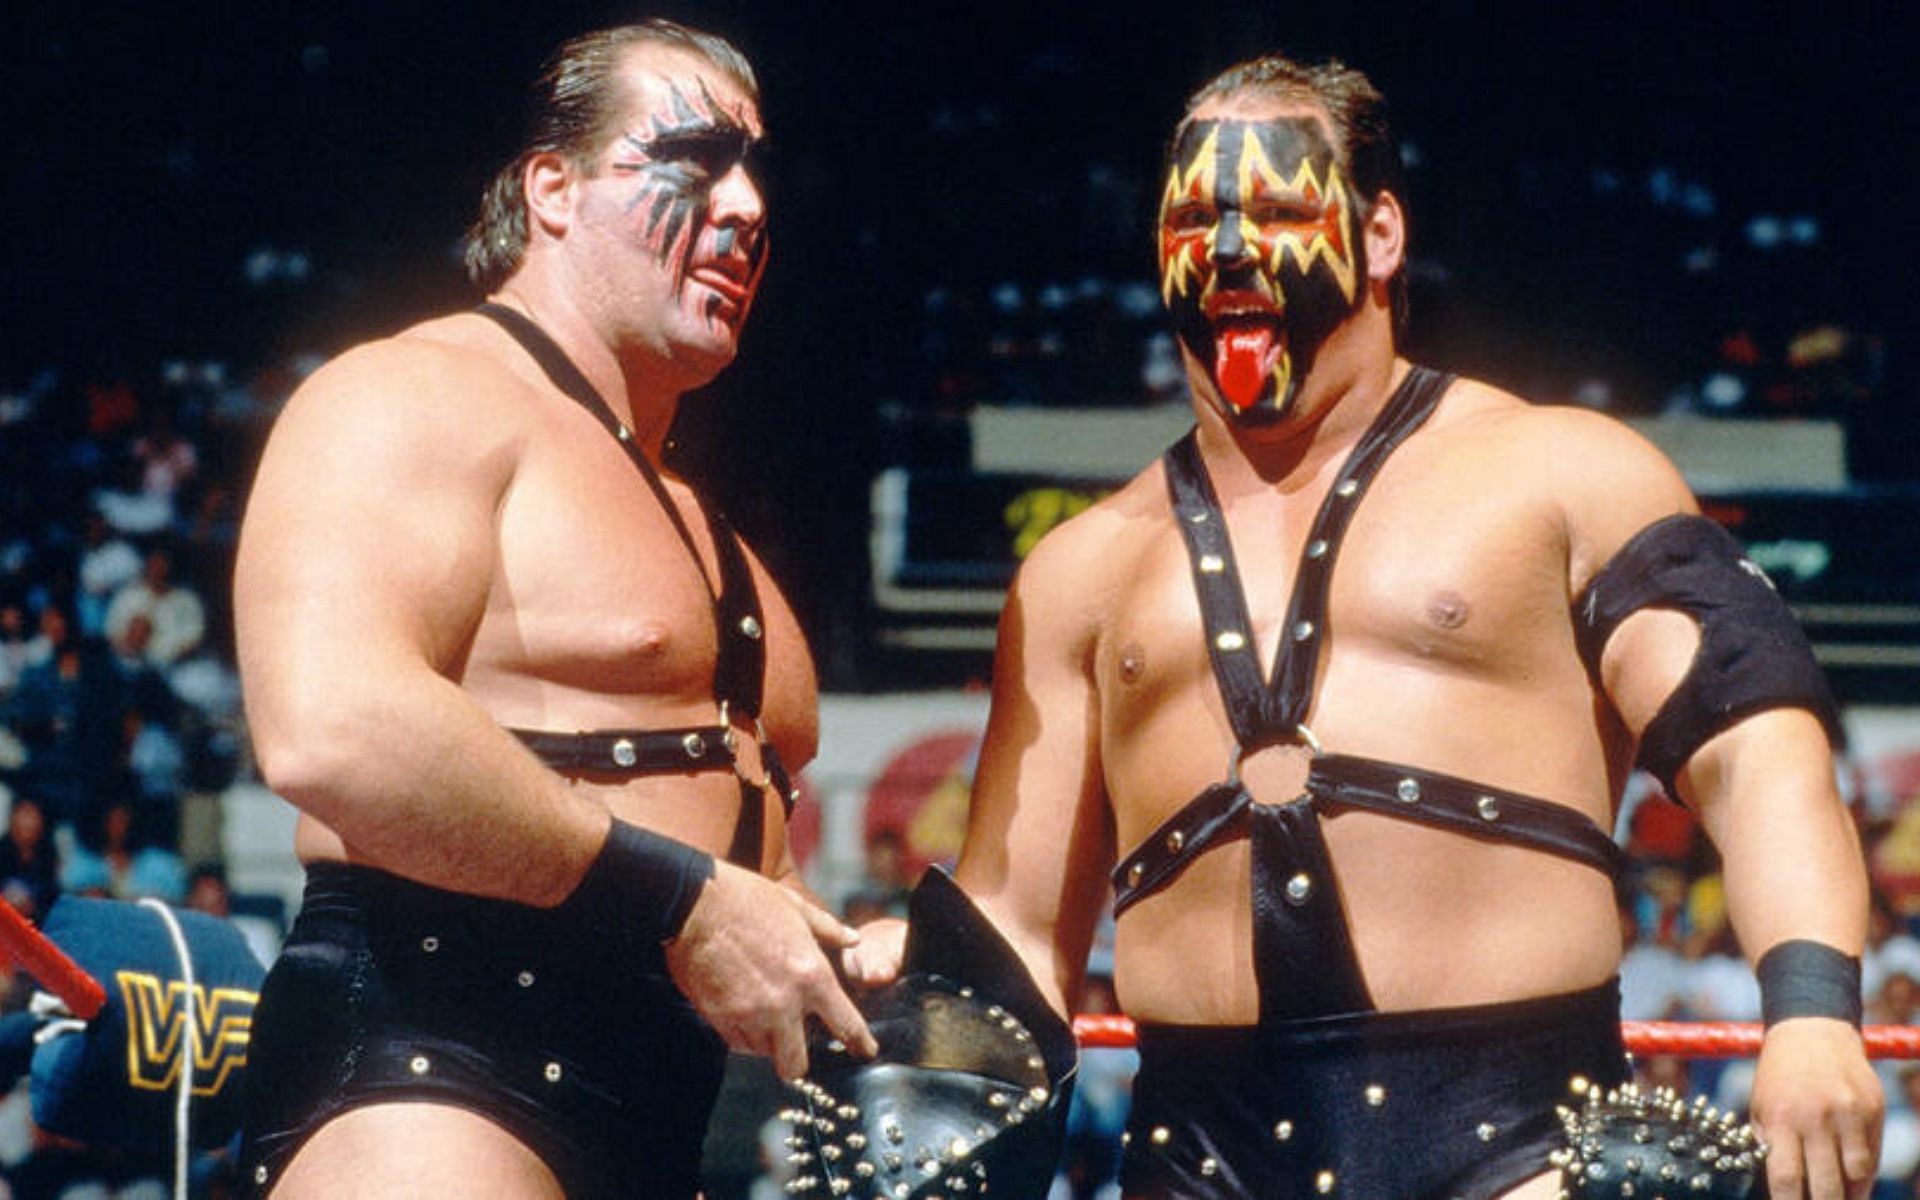 Ax and Smash created one of the most destructive tag teams in WWE history.